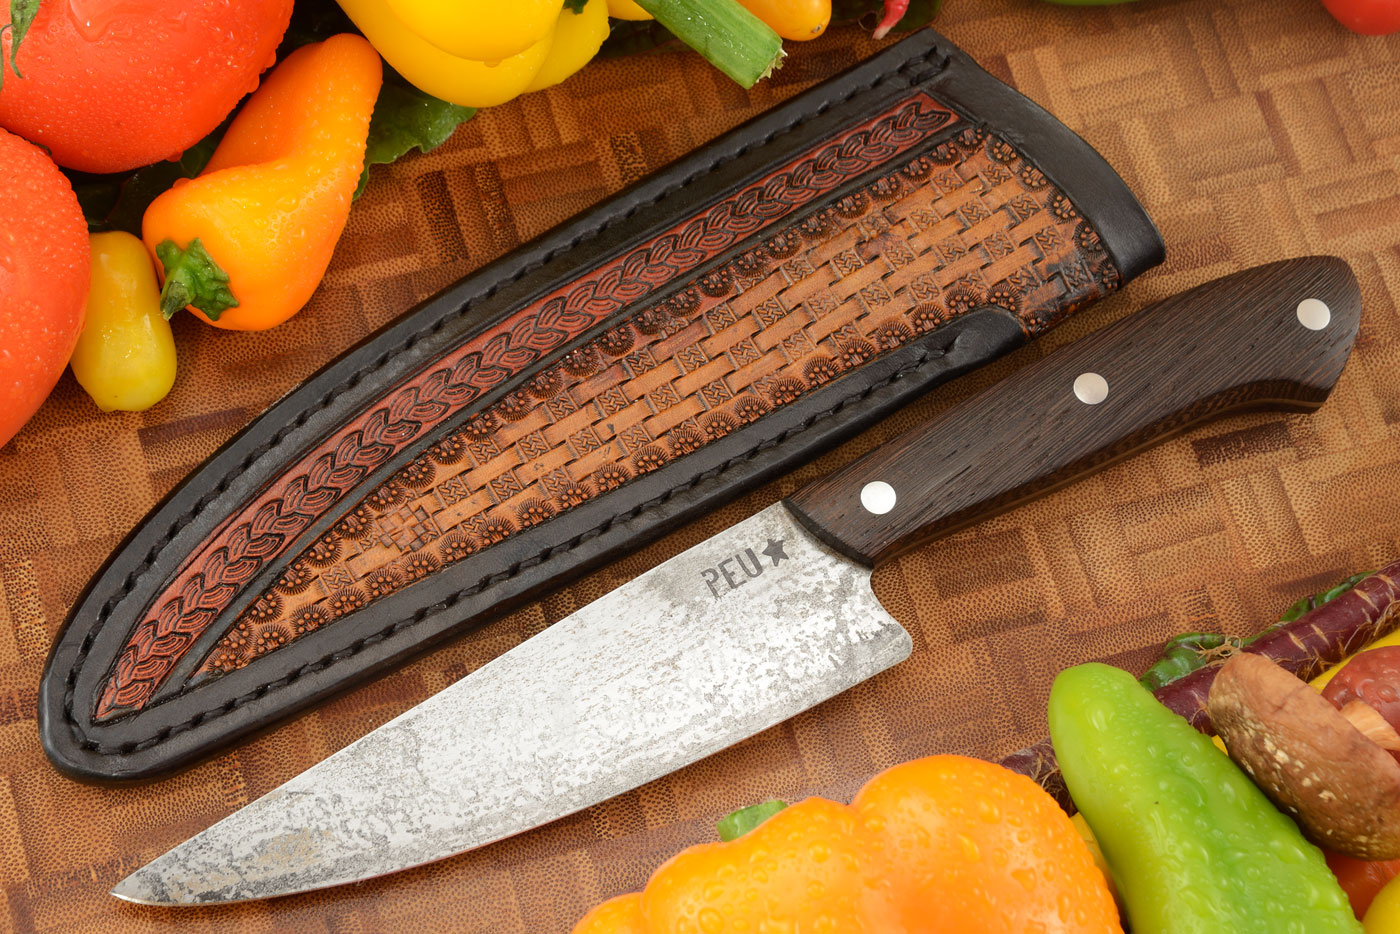 Chef's Utility Knife (Parrillero) with Wenge and O2 Carbon Steel